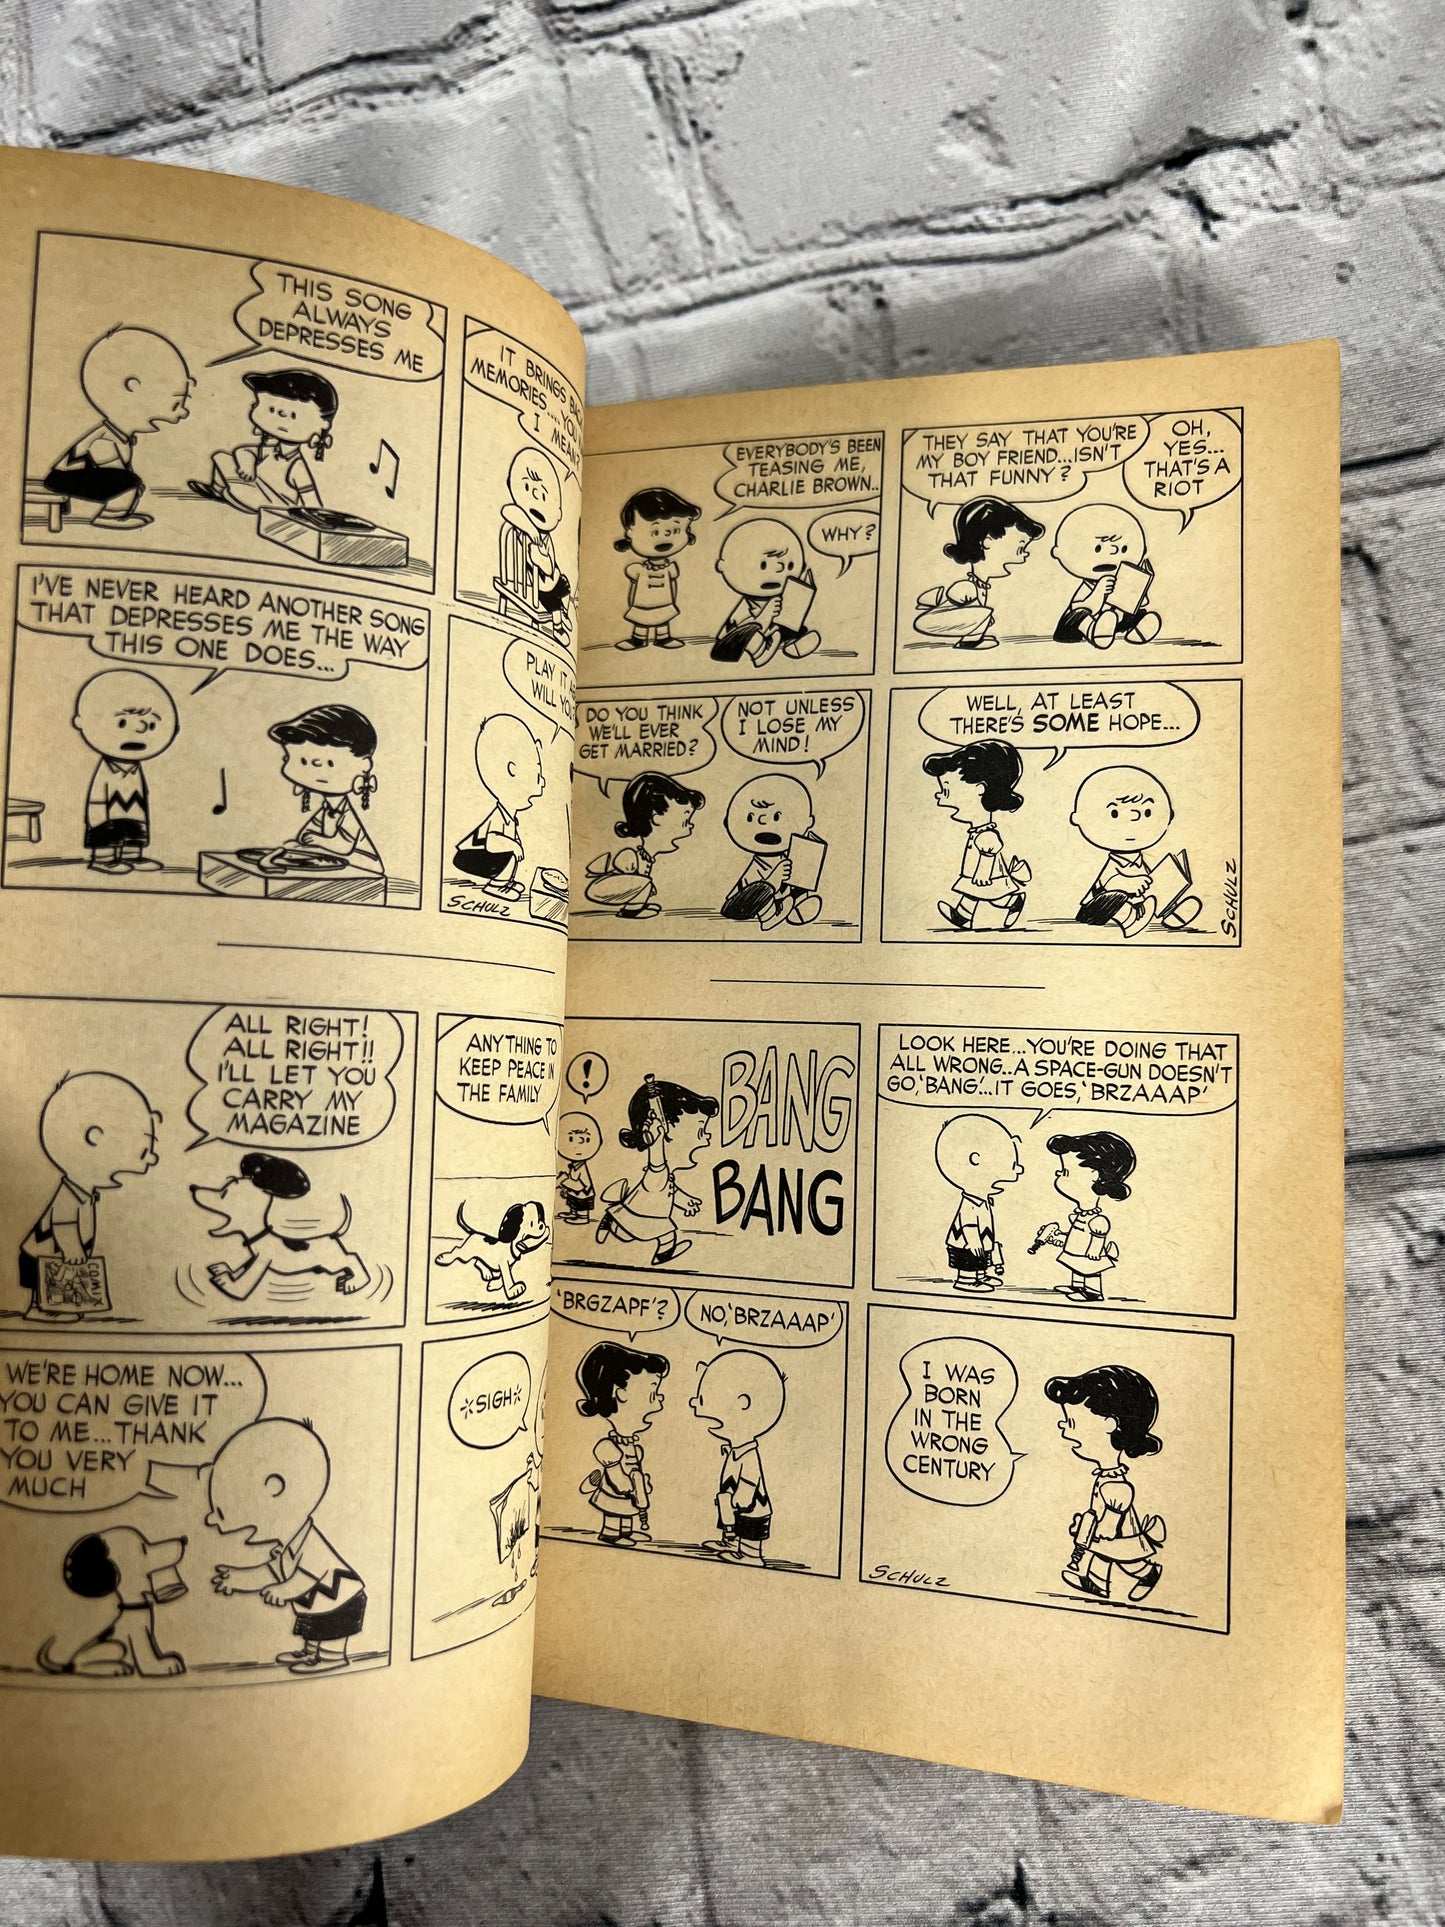 A New Peanuts Book By Charles M Schulz [Lot of 9 · 1950s-1960s]